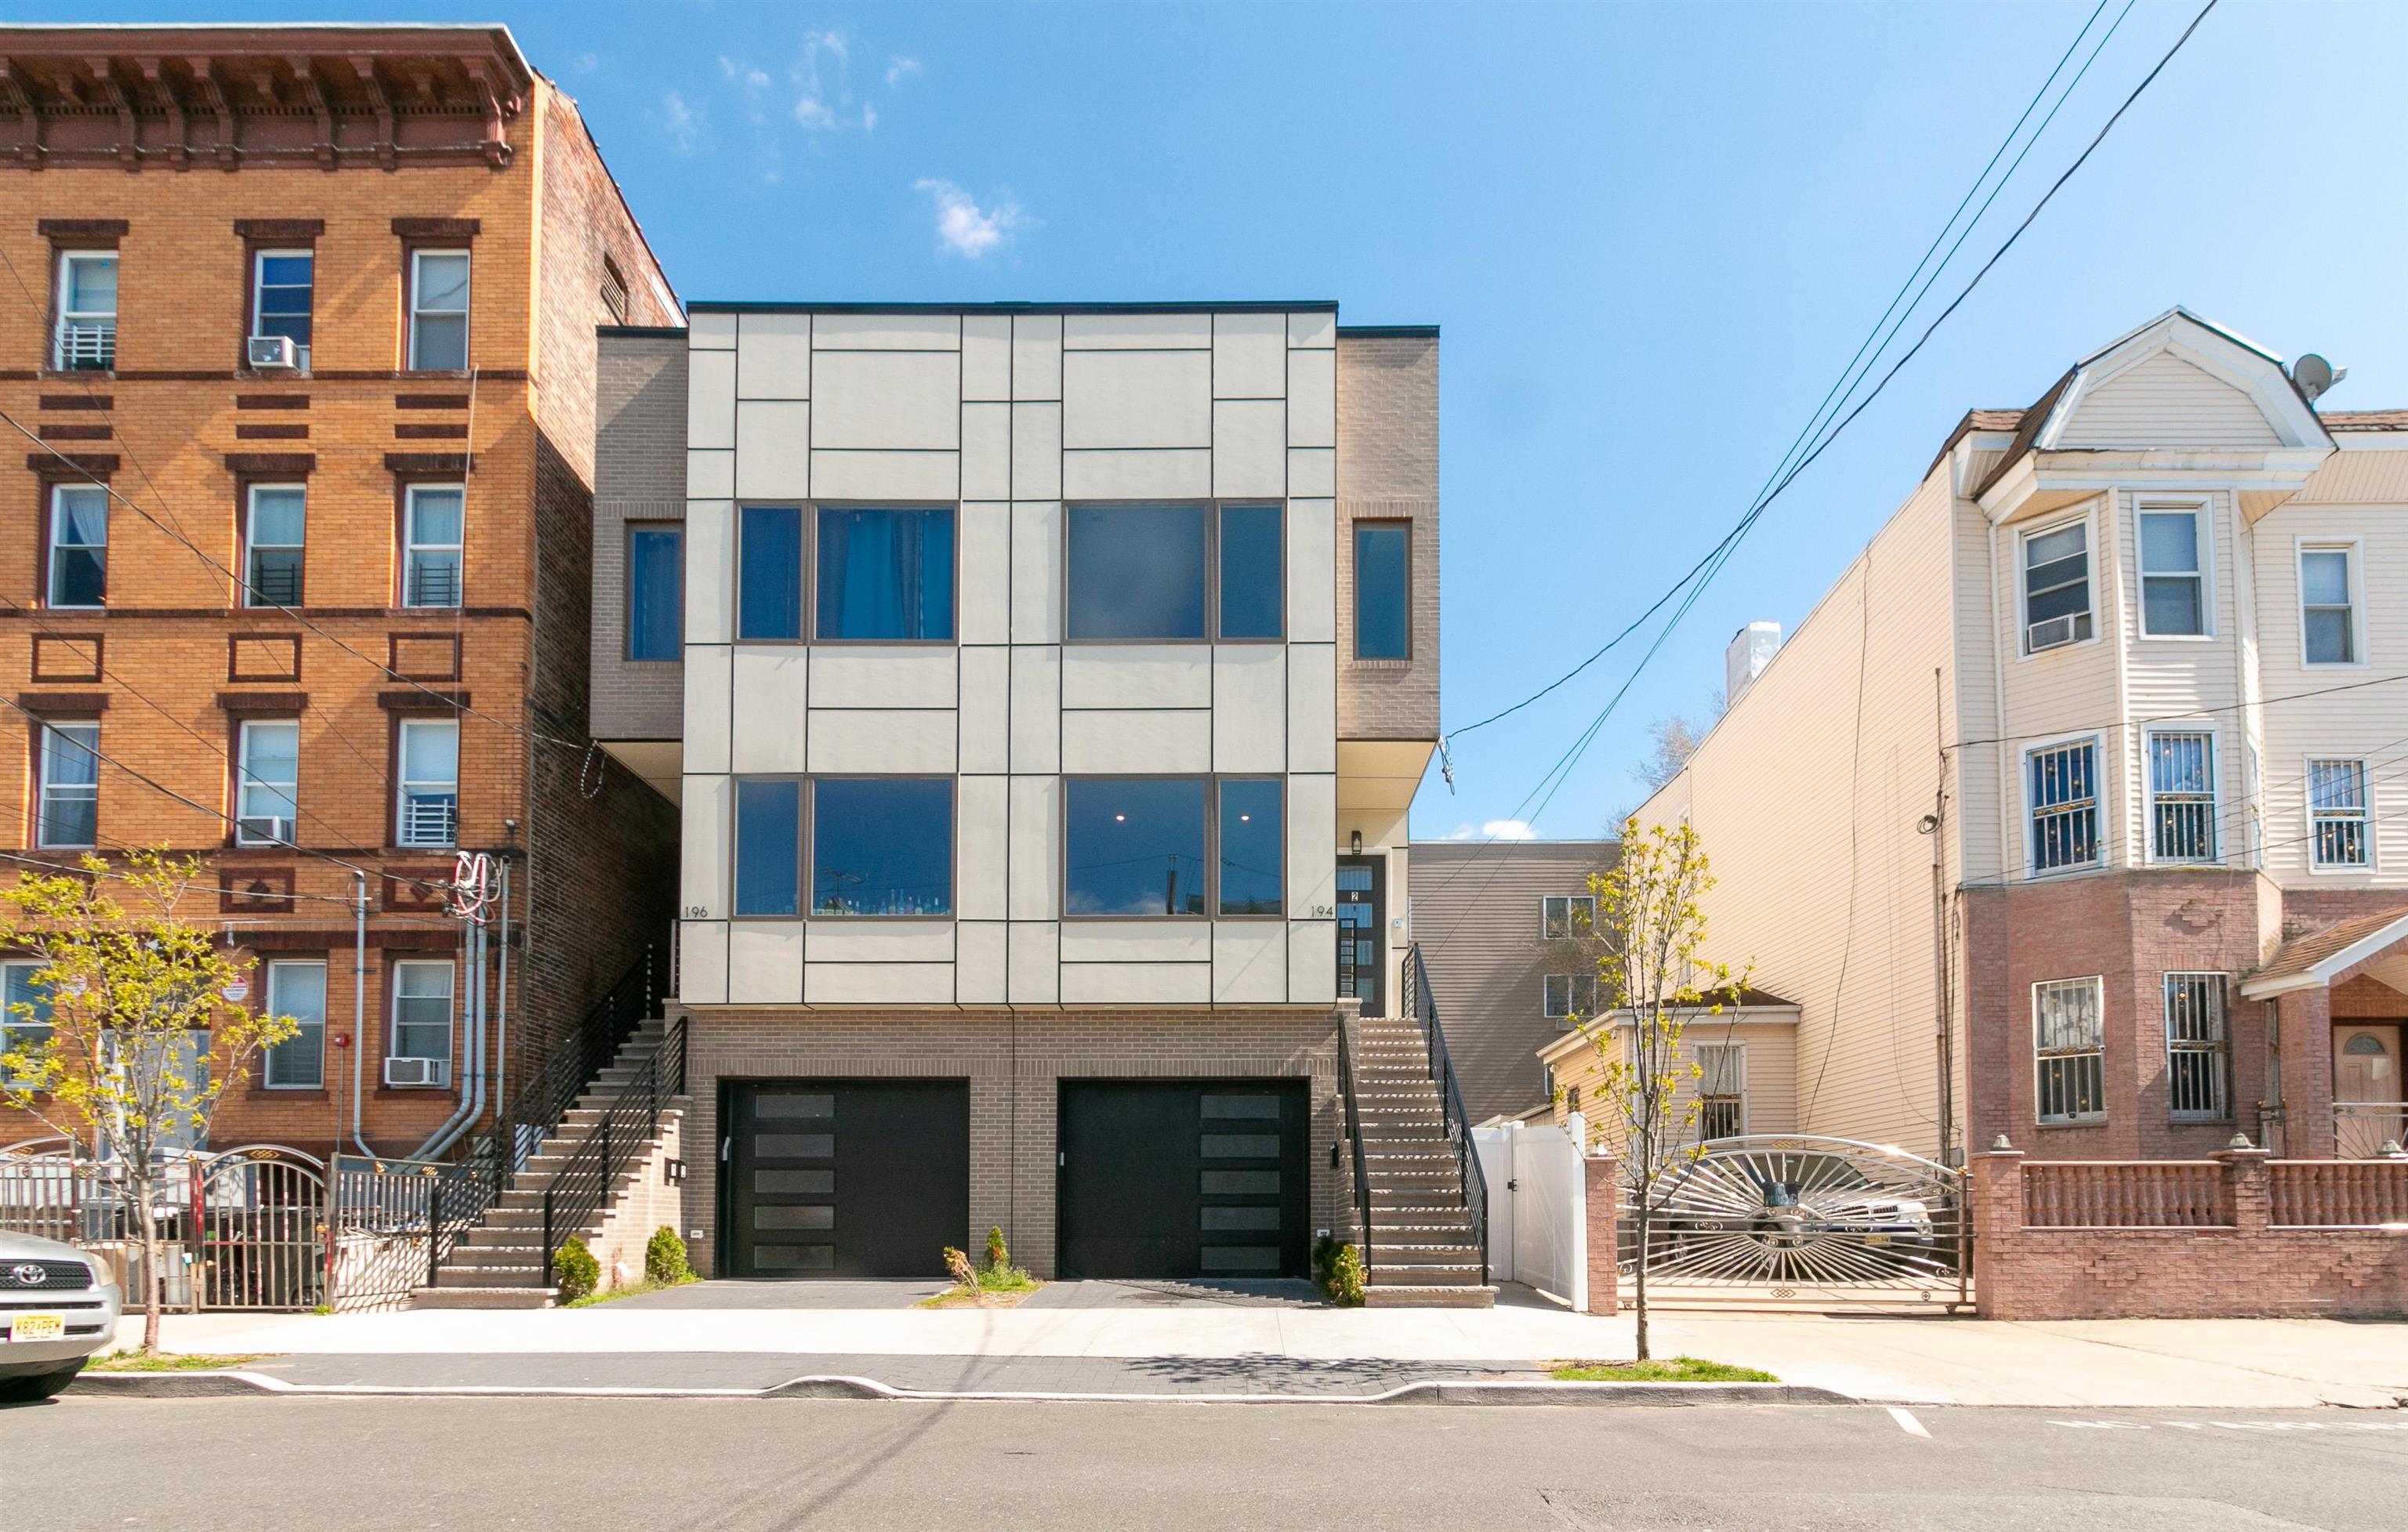 # 240006259 - For Rent in JERSEY CITY - Journal Square NJ